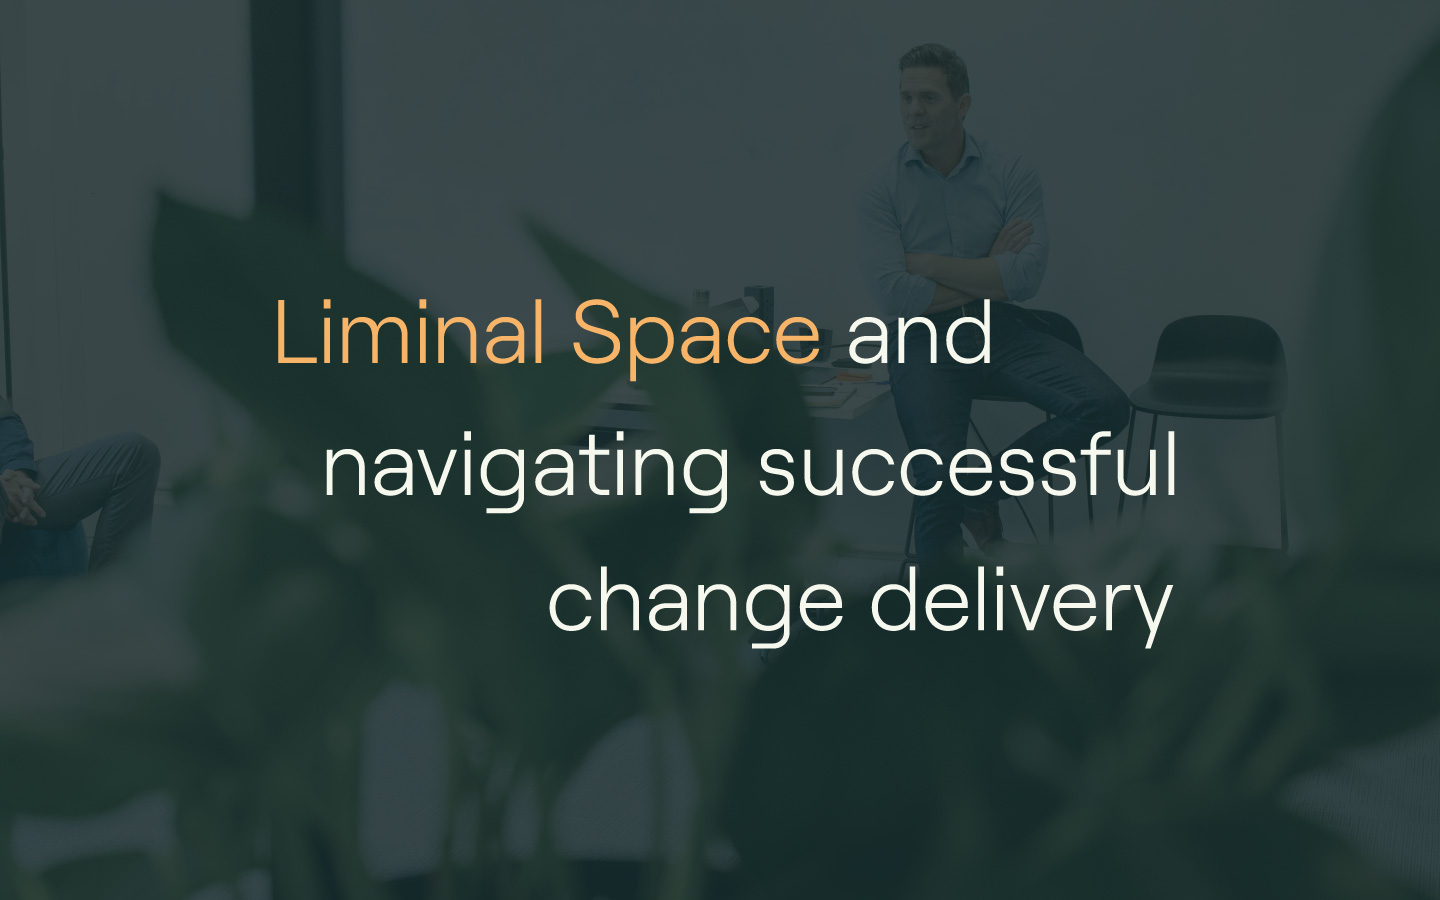 Liminal space and navigating successful business change delivery - Blog Article by Perform Partners